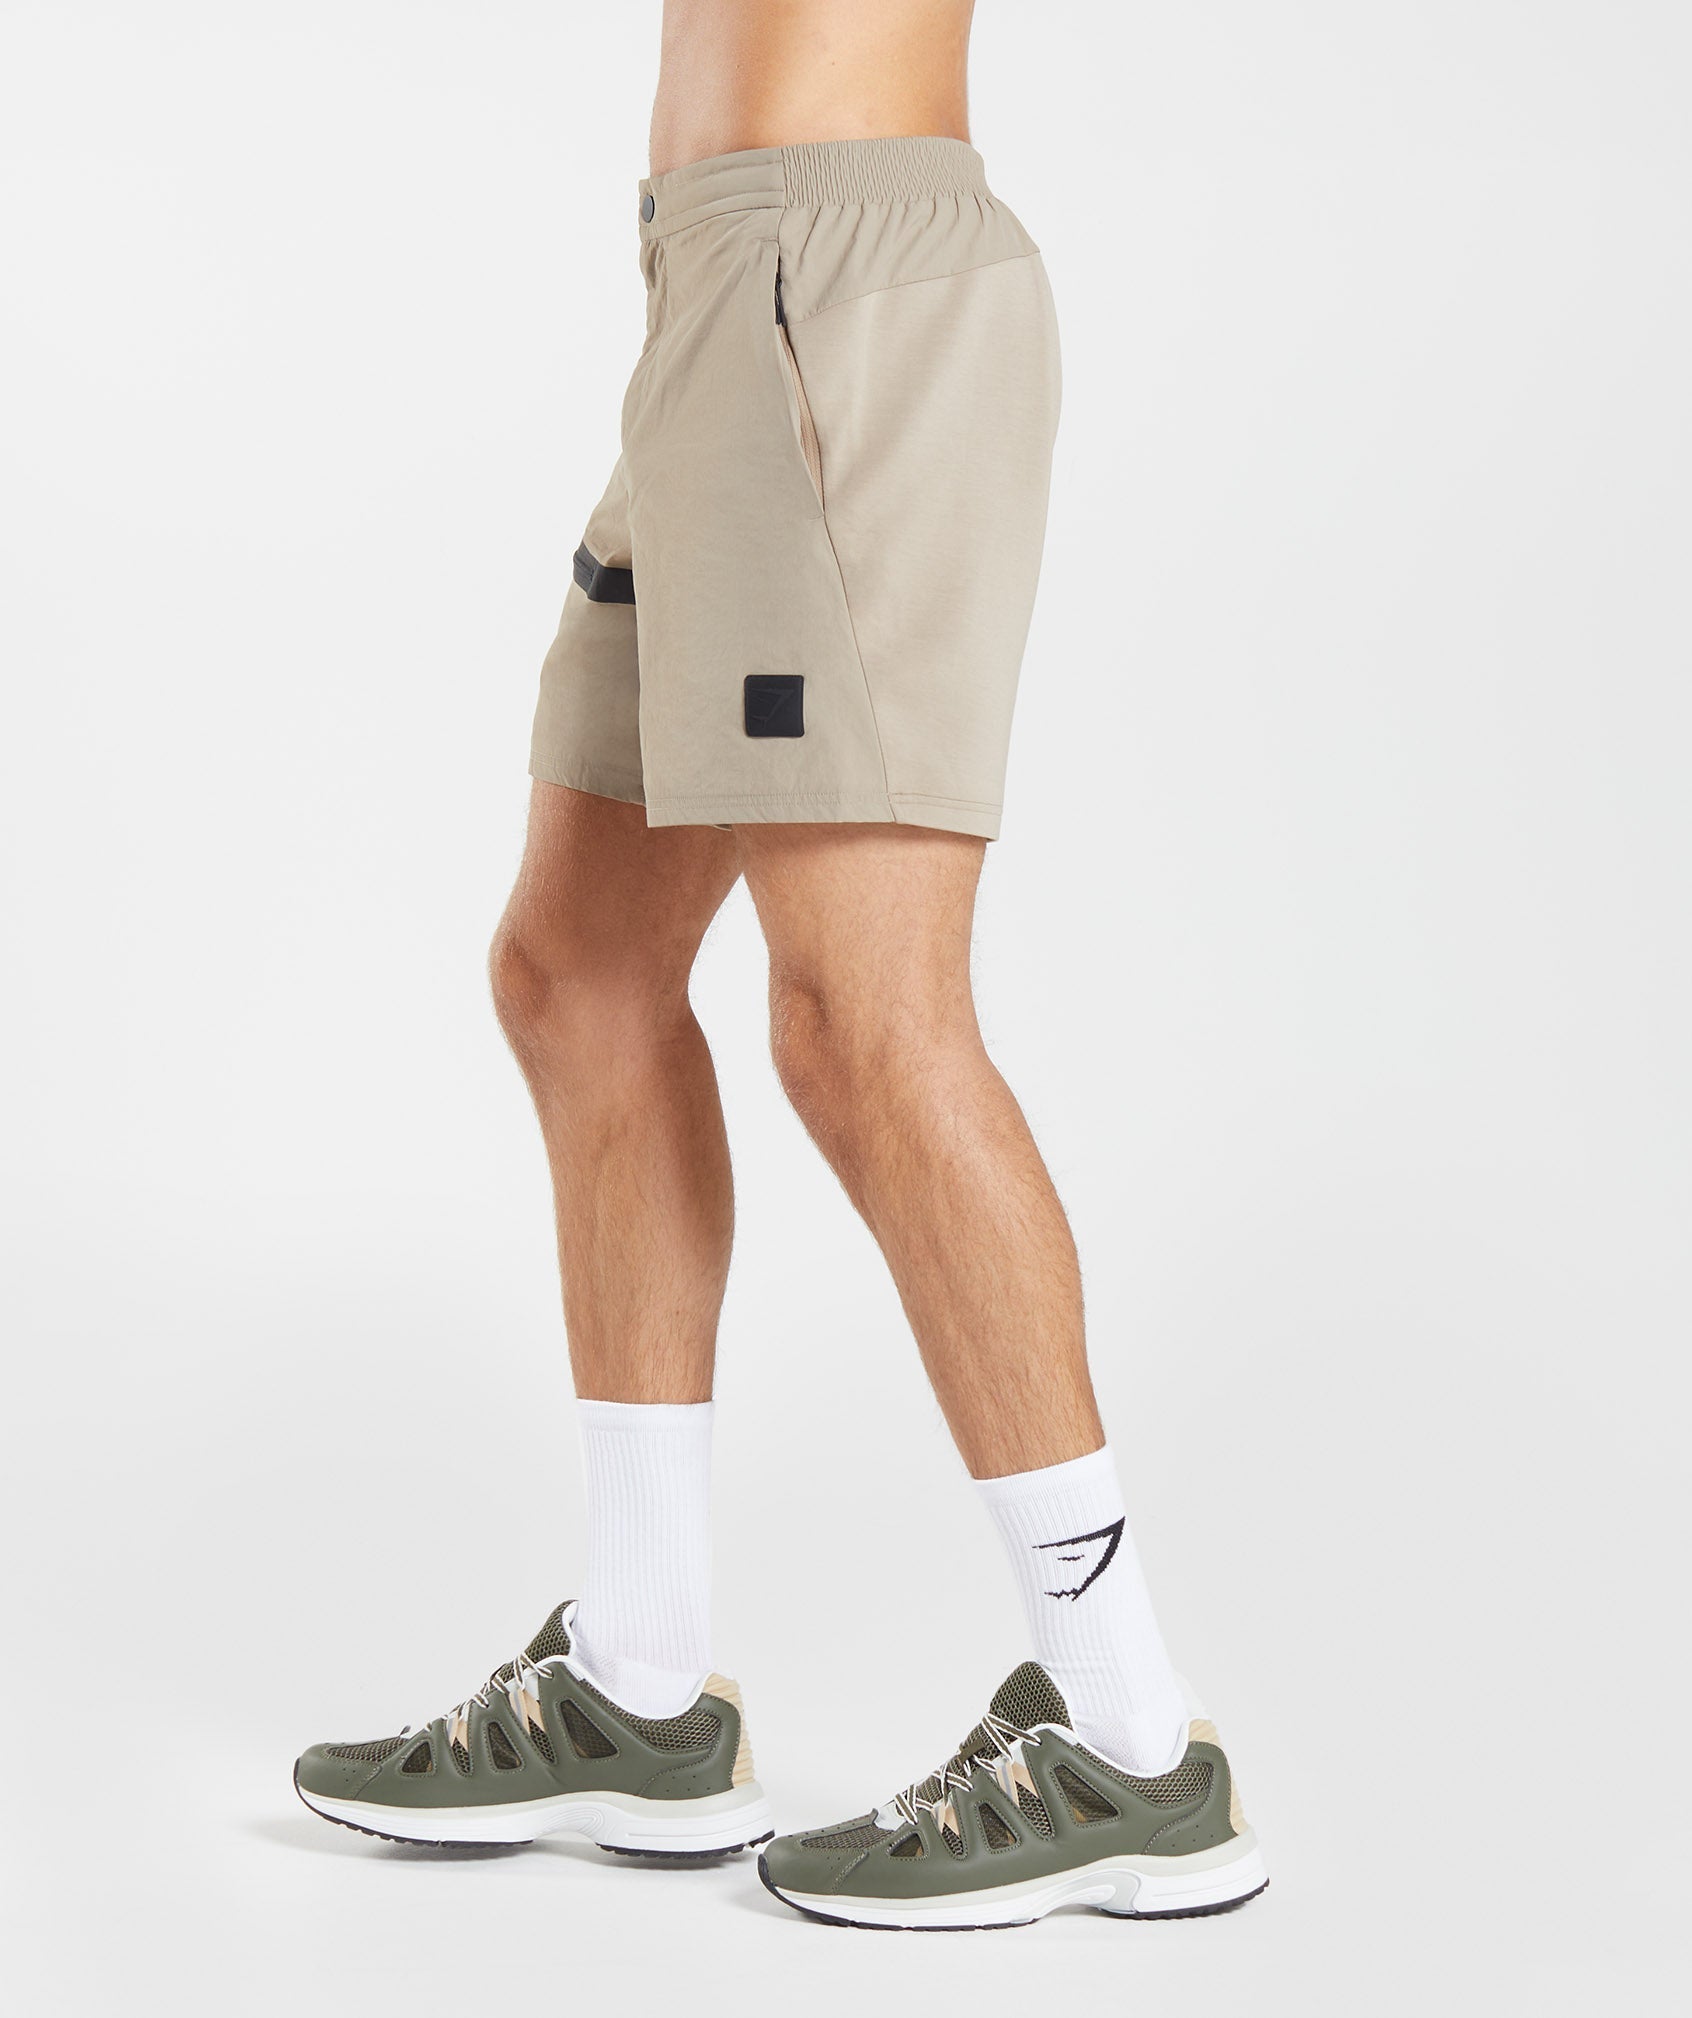 Retake Woven 7" Shorts in Cement Brown